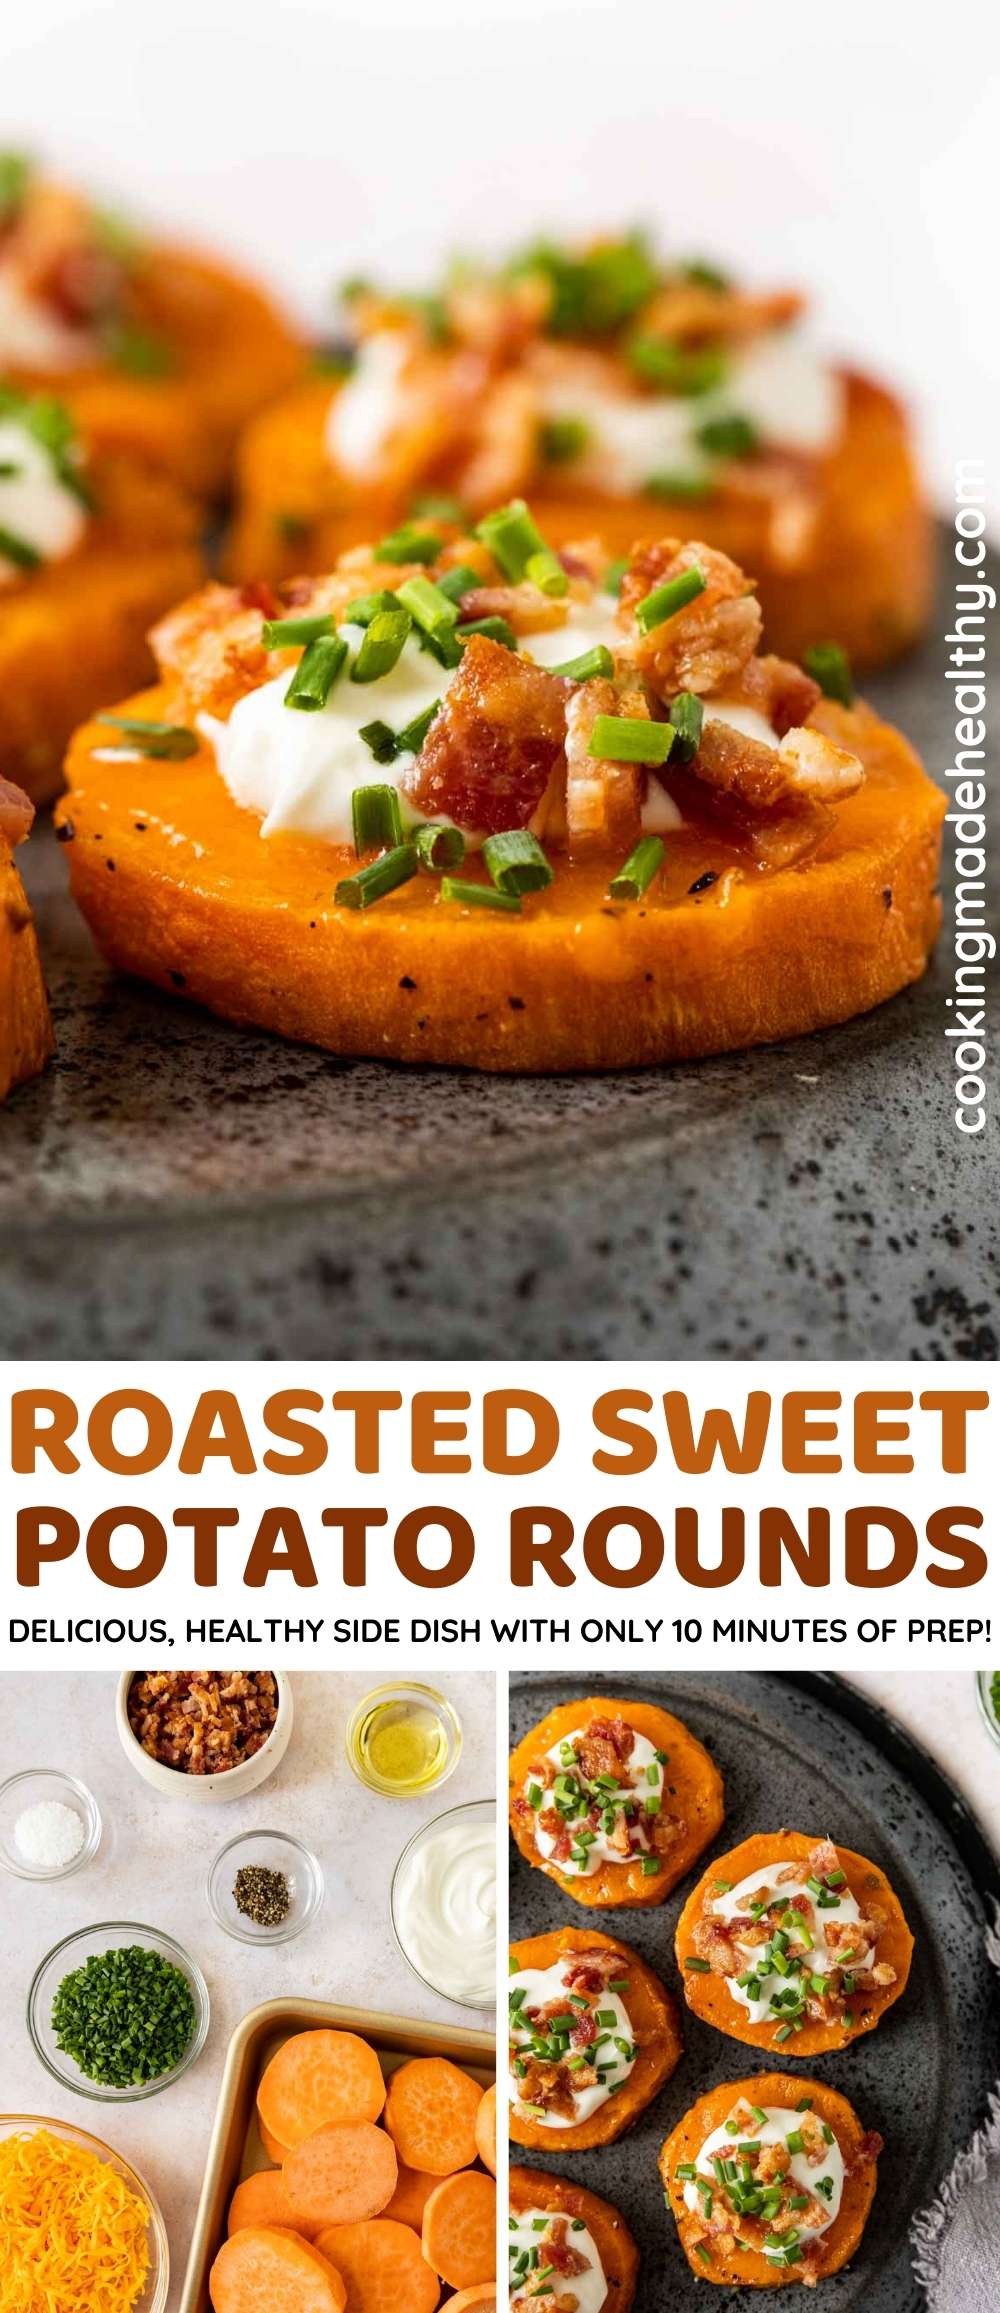 Roasted Sweet Potato Rounds collage